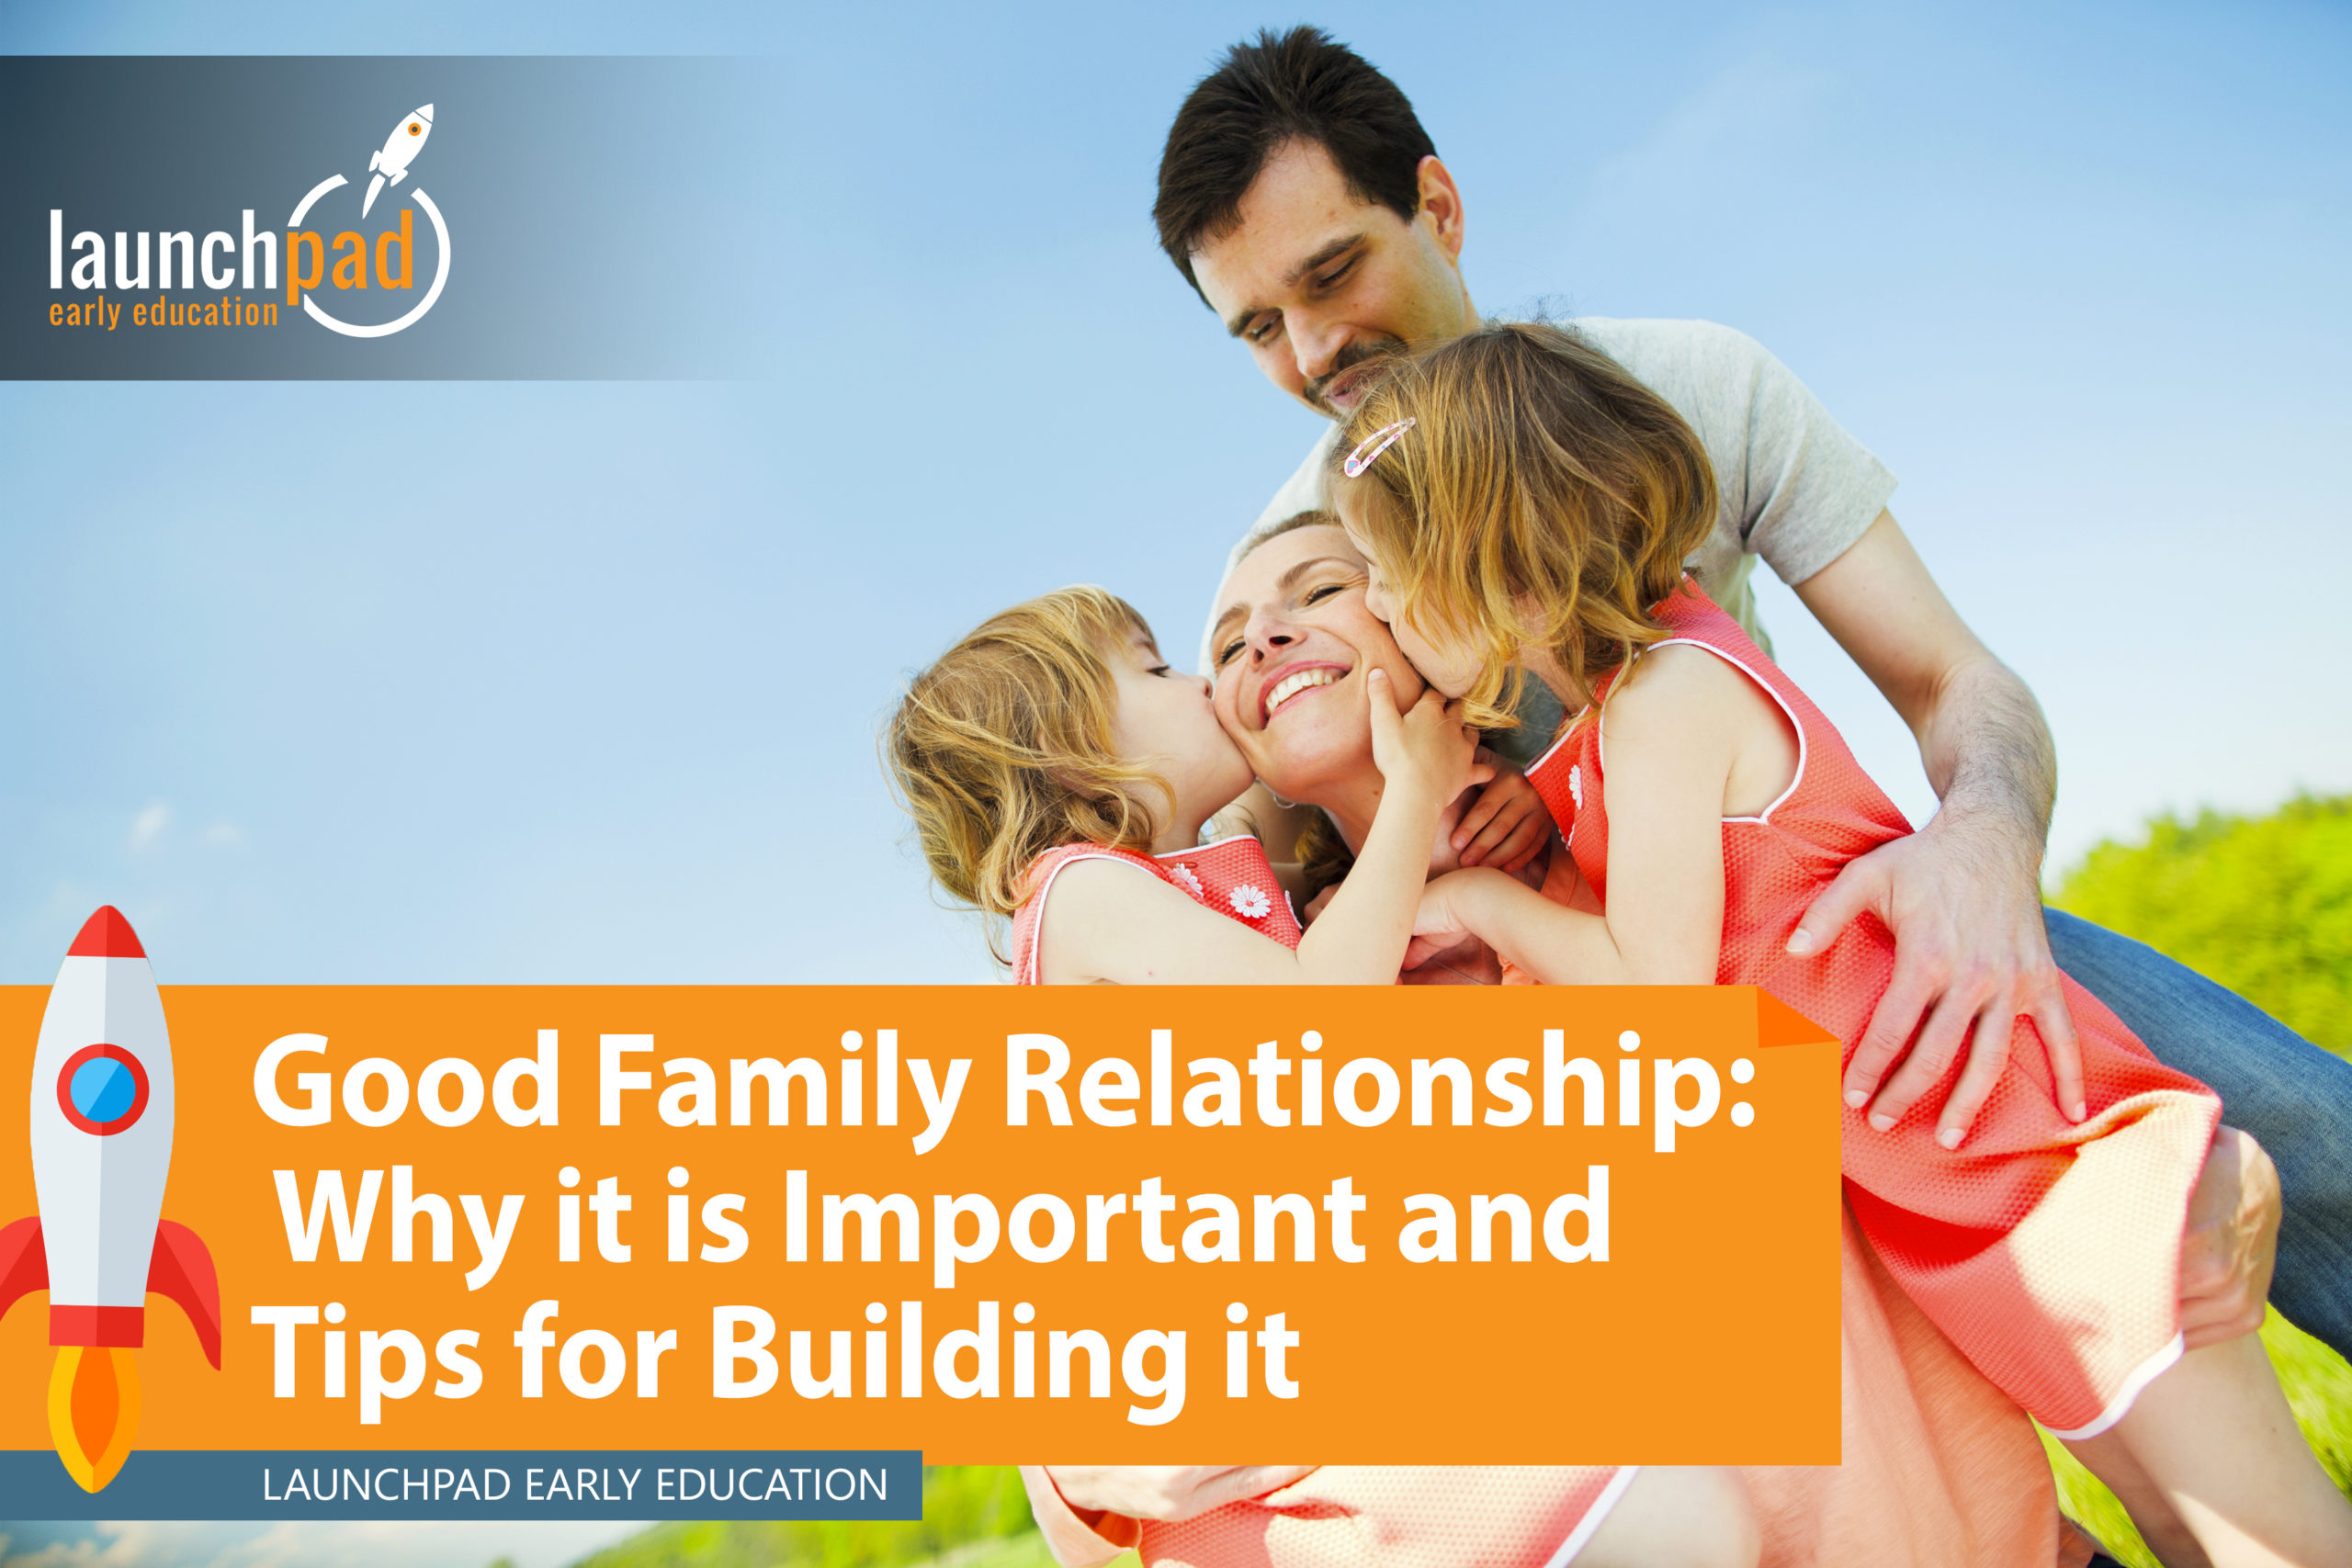 good family relationship: why it is important and tips for building it